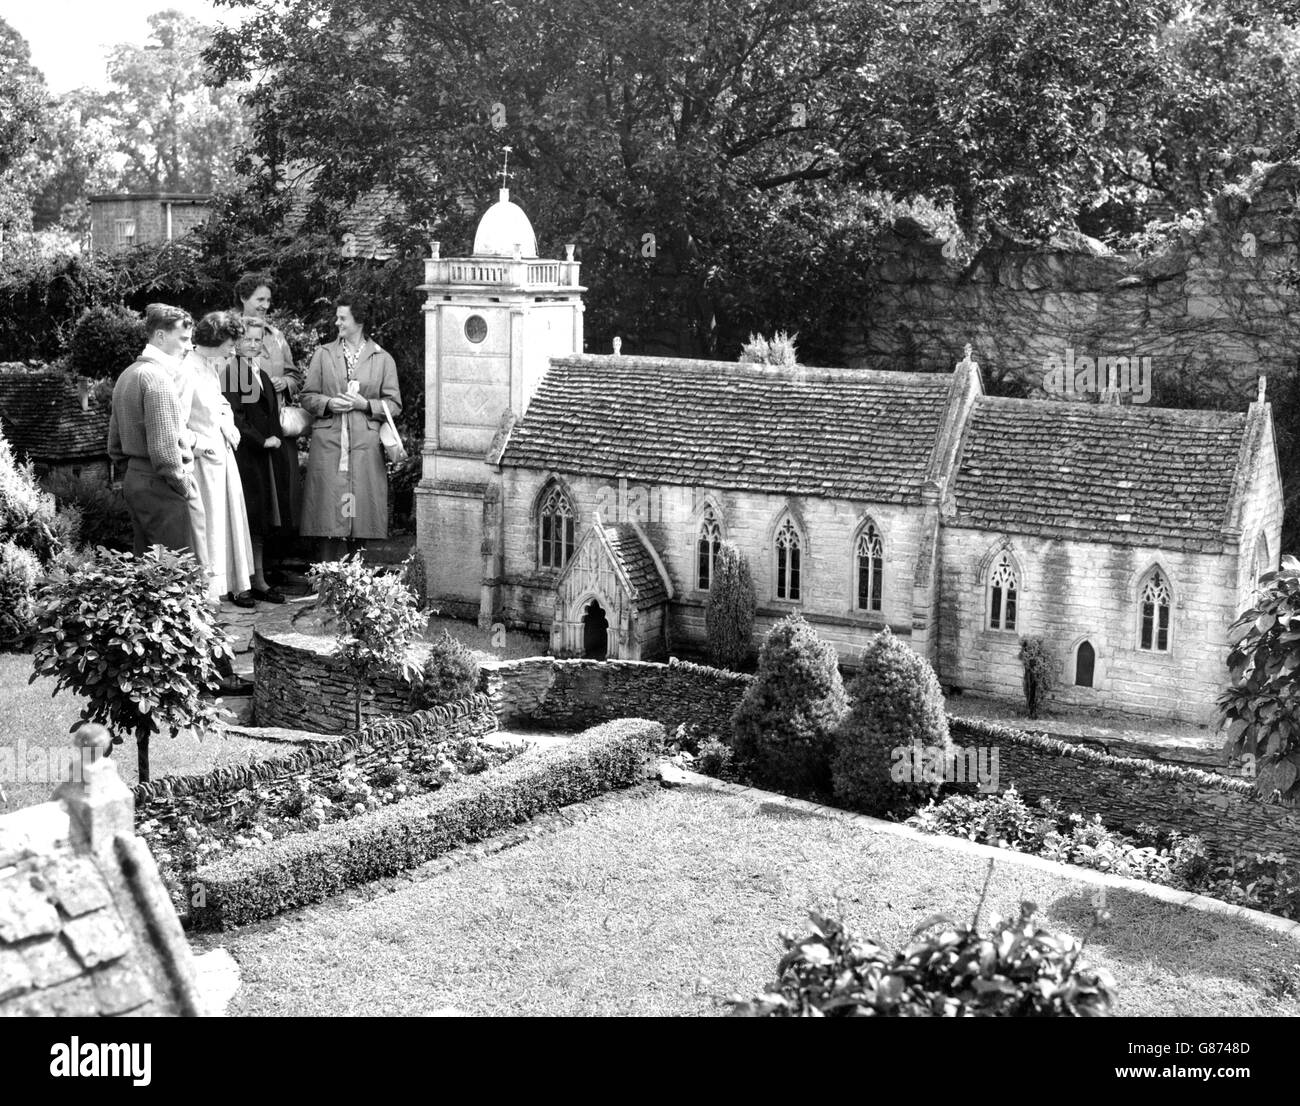 A one-ninth scale model of the parish church at Bourton-on-the-Water, which forms part of the model village in the Cotswold beauty spot. Stock Photo